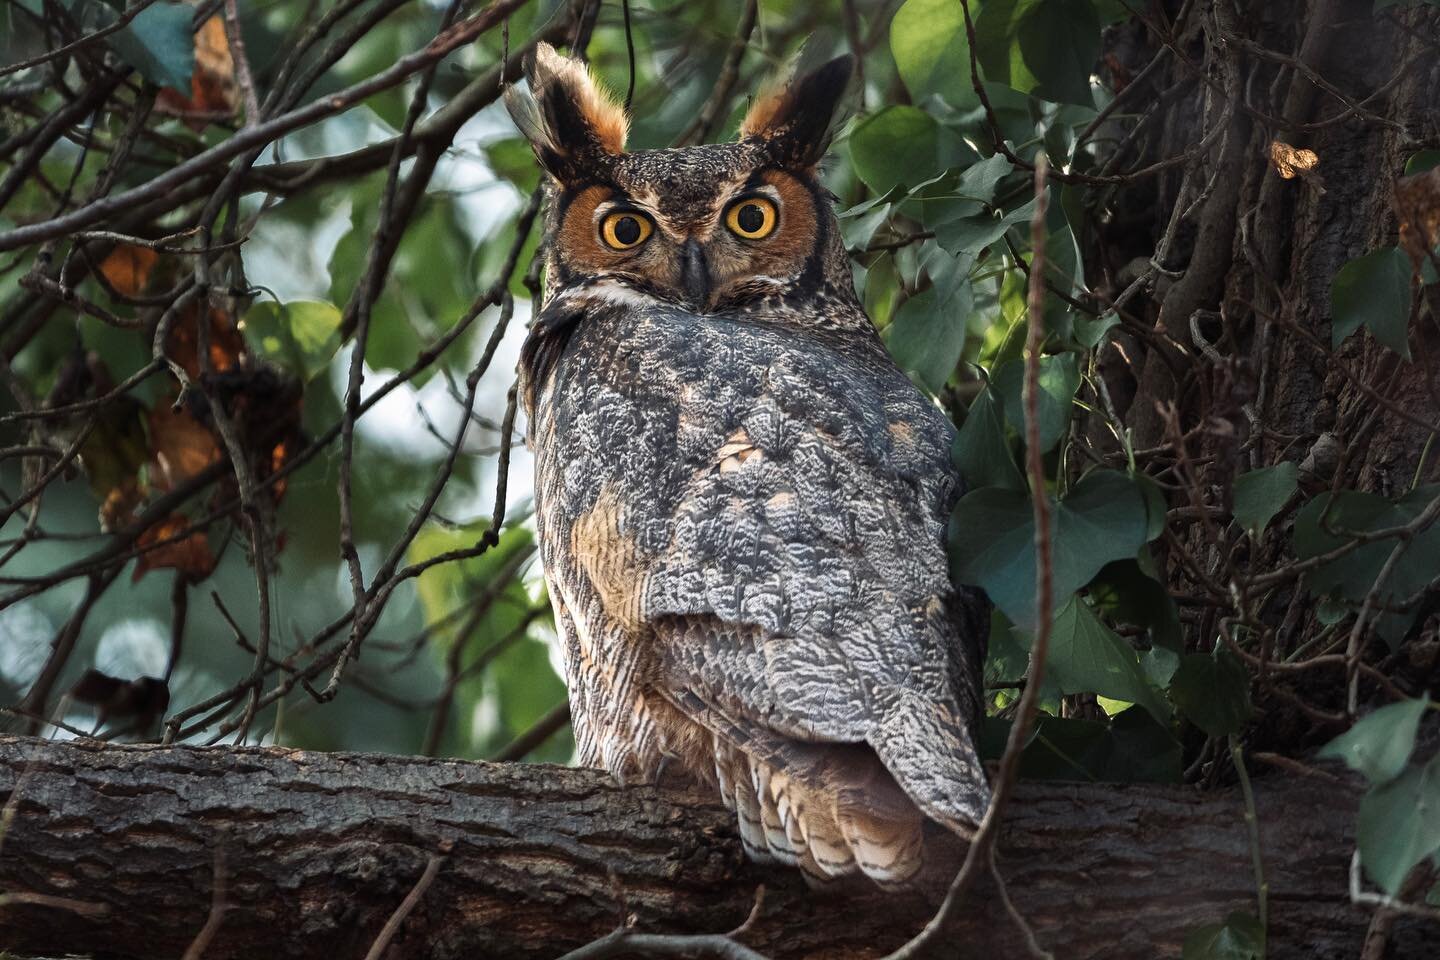 OWLERT! 🦉 
SWIPE 👉🏼 for a close up 

Spent Christmas looking for owls and it did not disappoint. Lucky to see this great horned owl before the rain showed up! 

#birdphotography #conservationphotography #climatechange #greathornedowl #wildlifephot